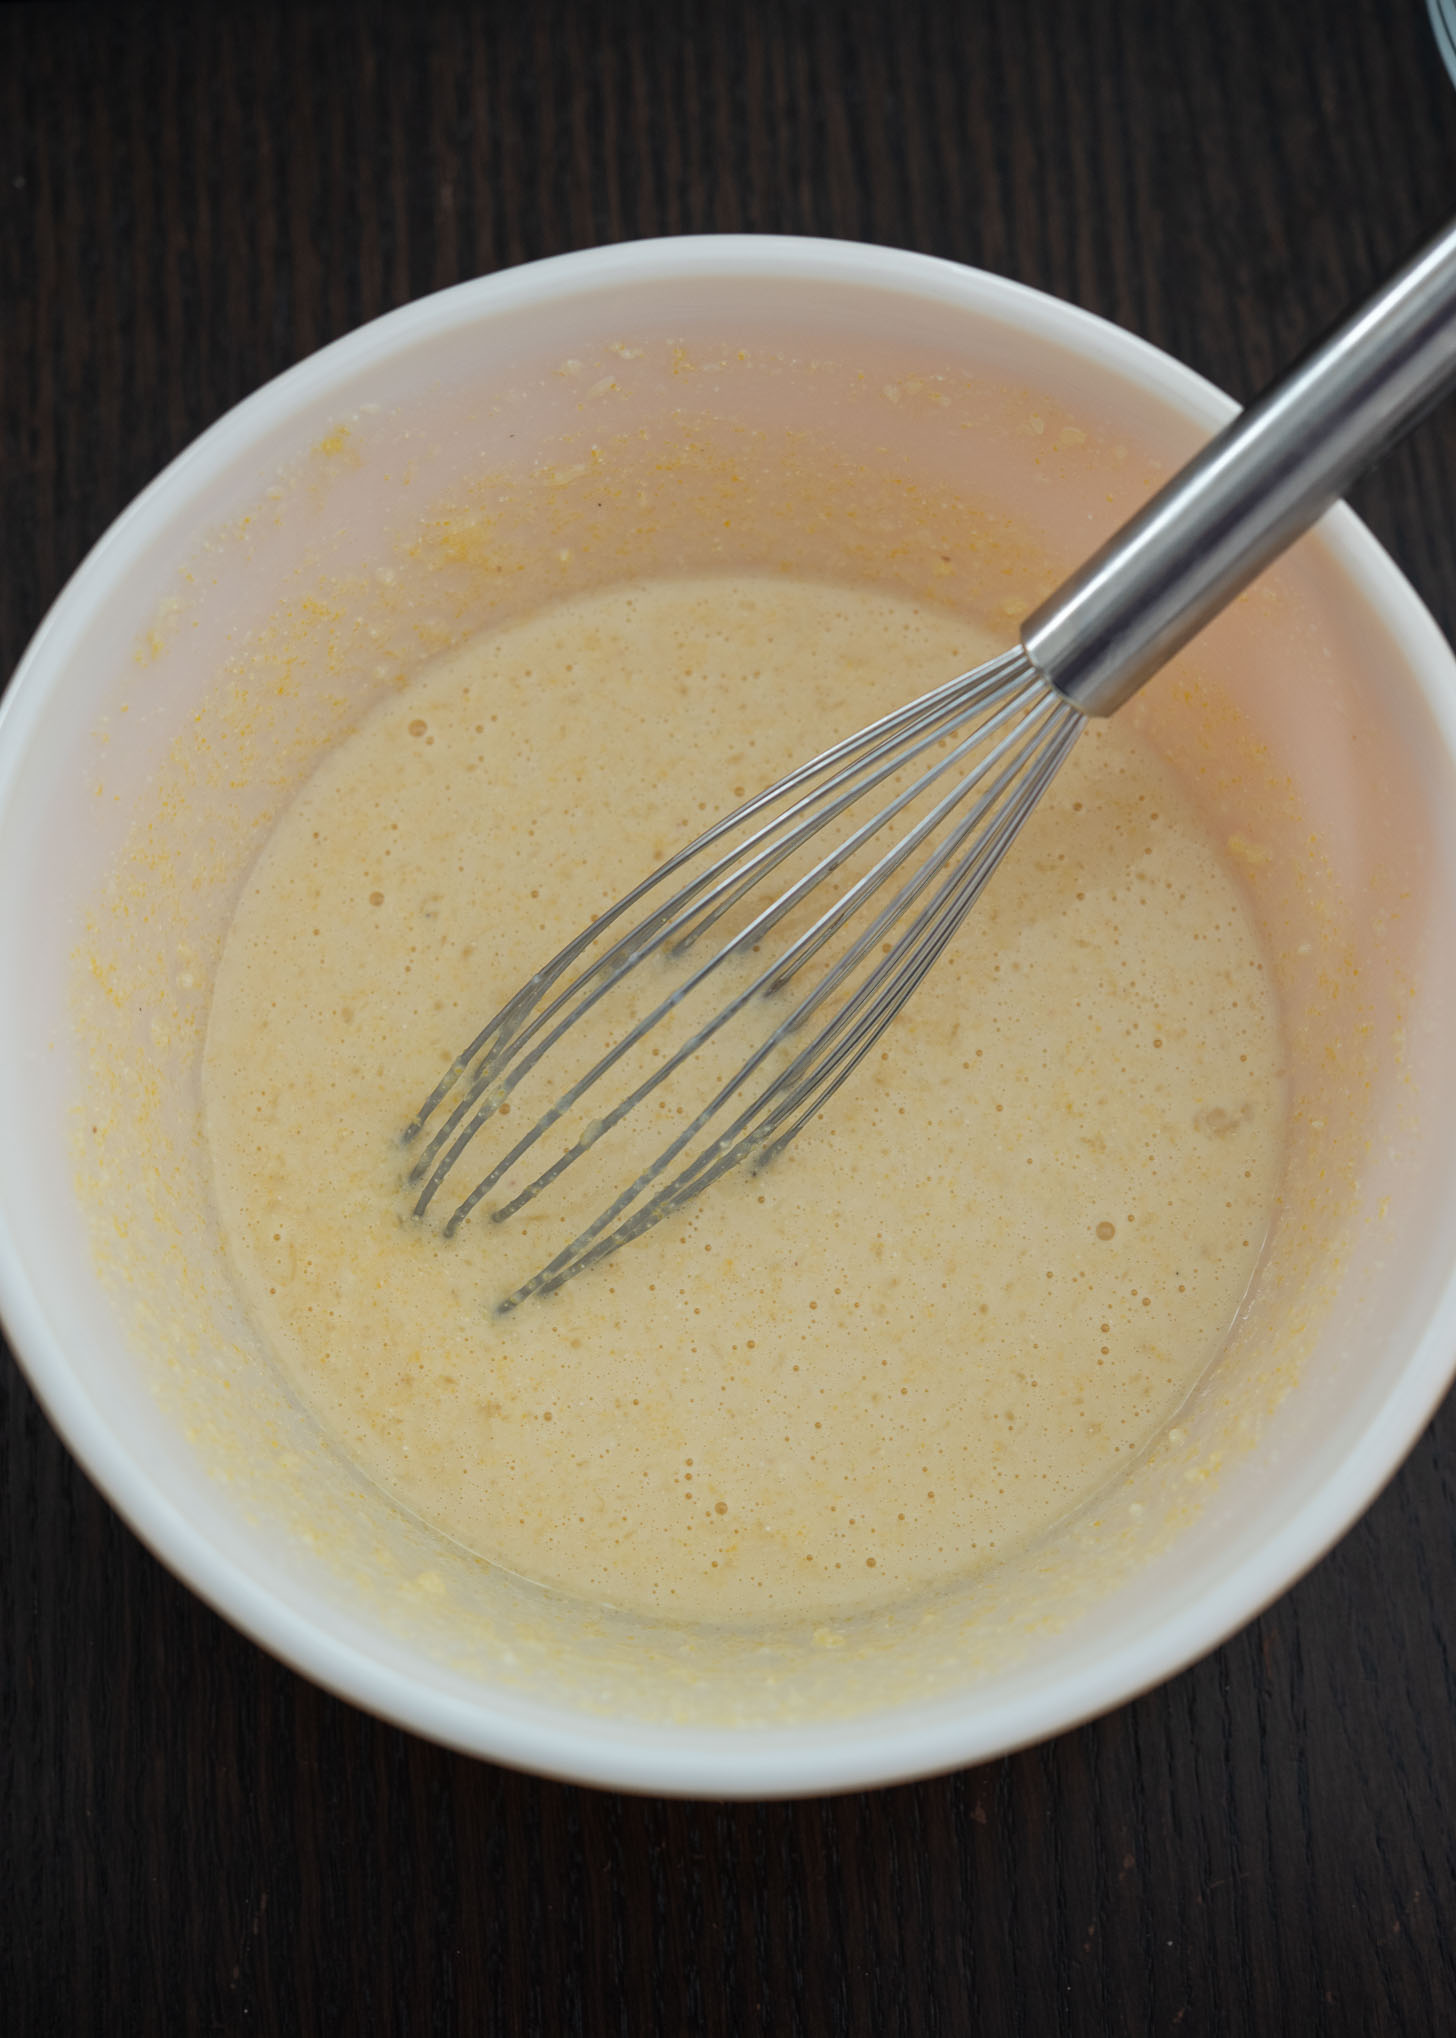 Egg bread batter made with pancake mix and corn meal.